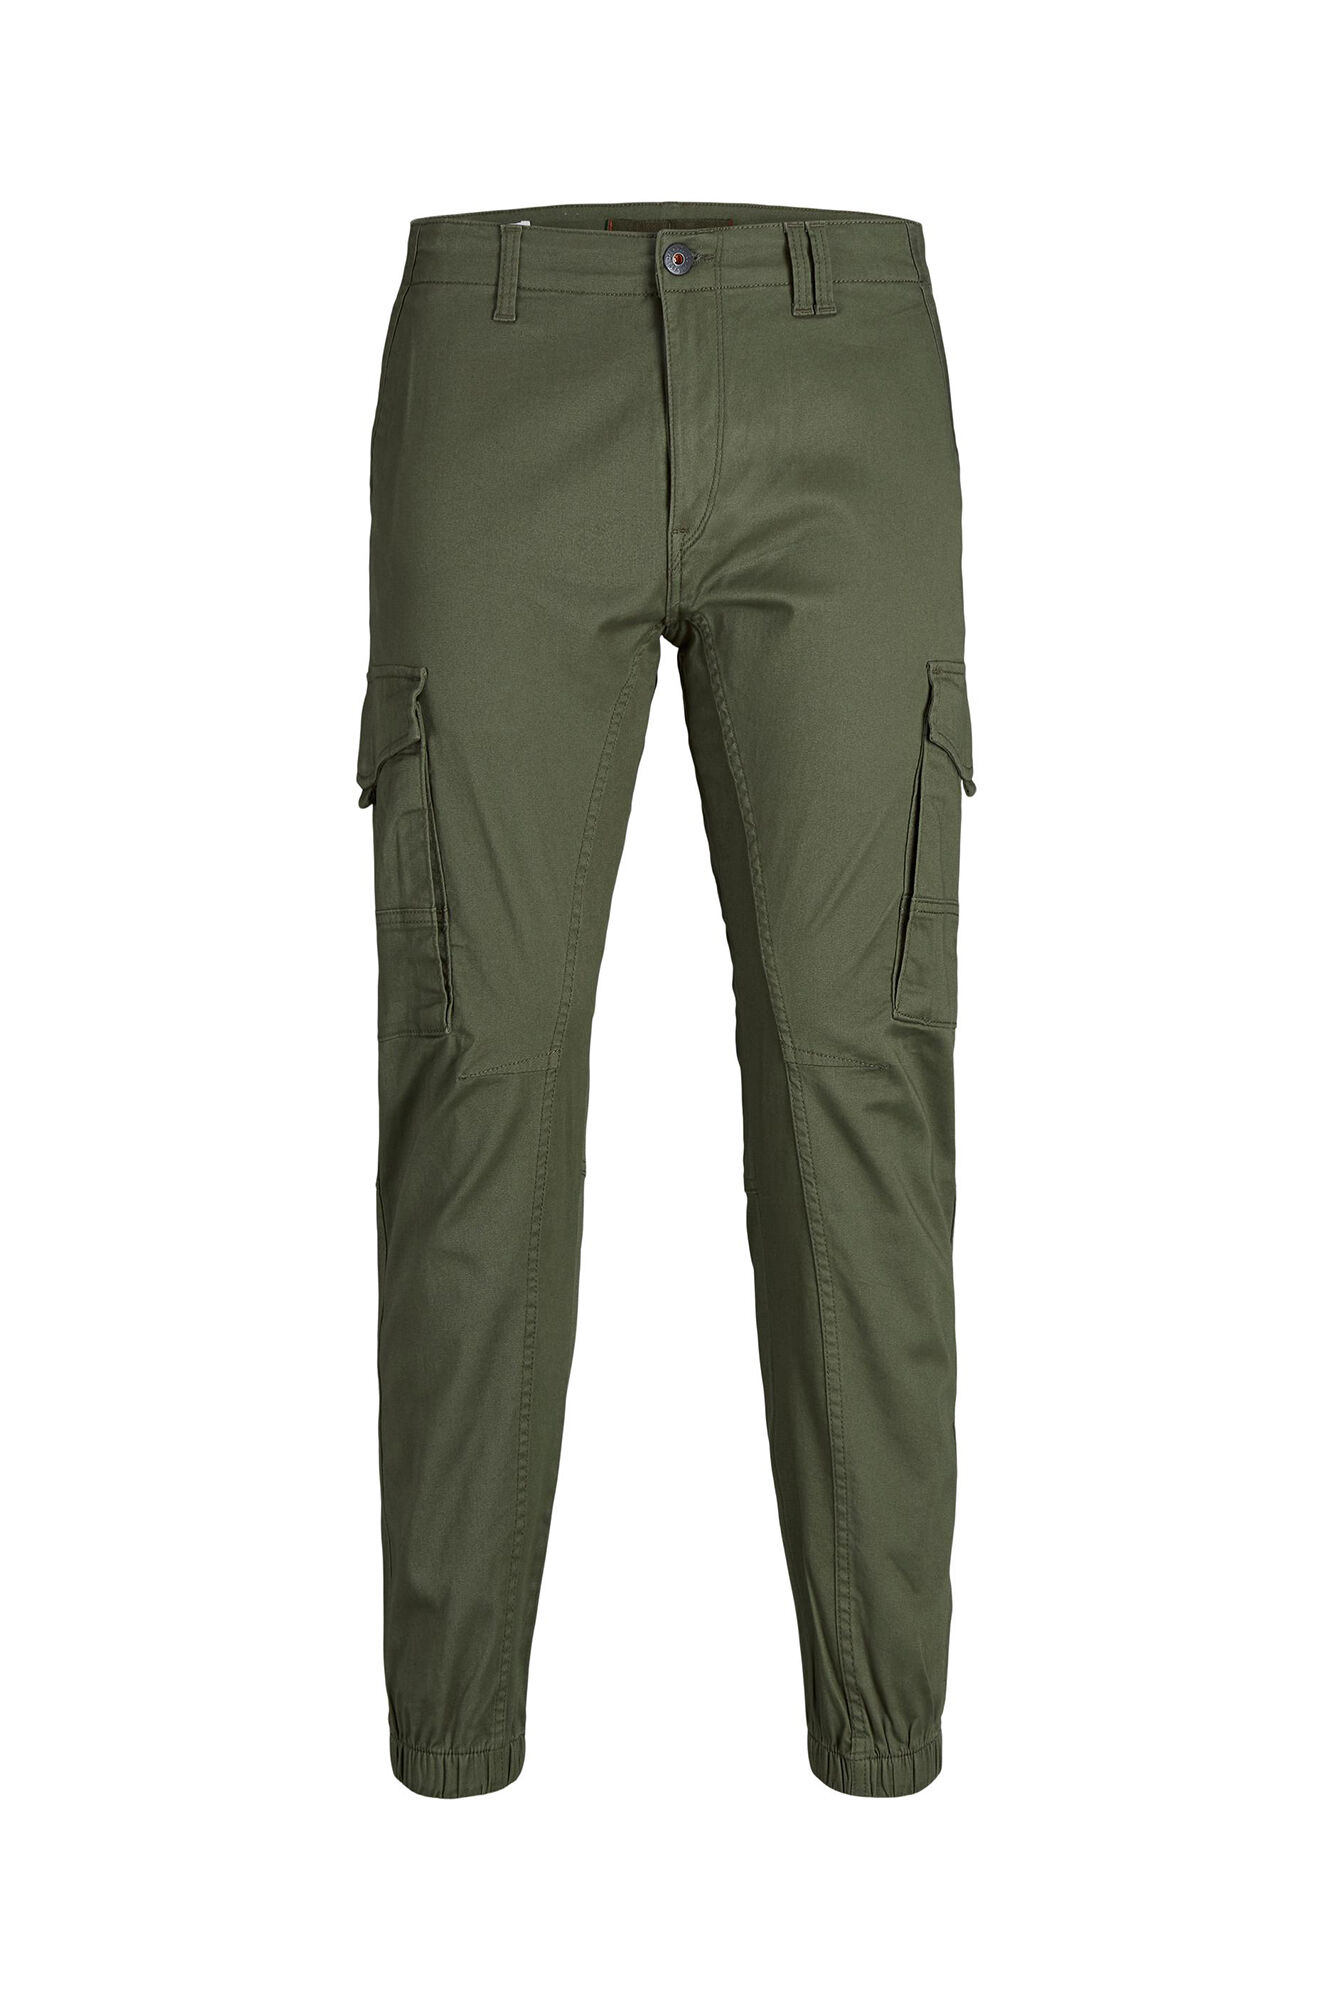 Yours Clothing DARTED WAIST TAPERED - Trousers - green - Zalando.de